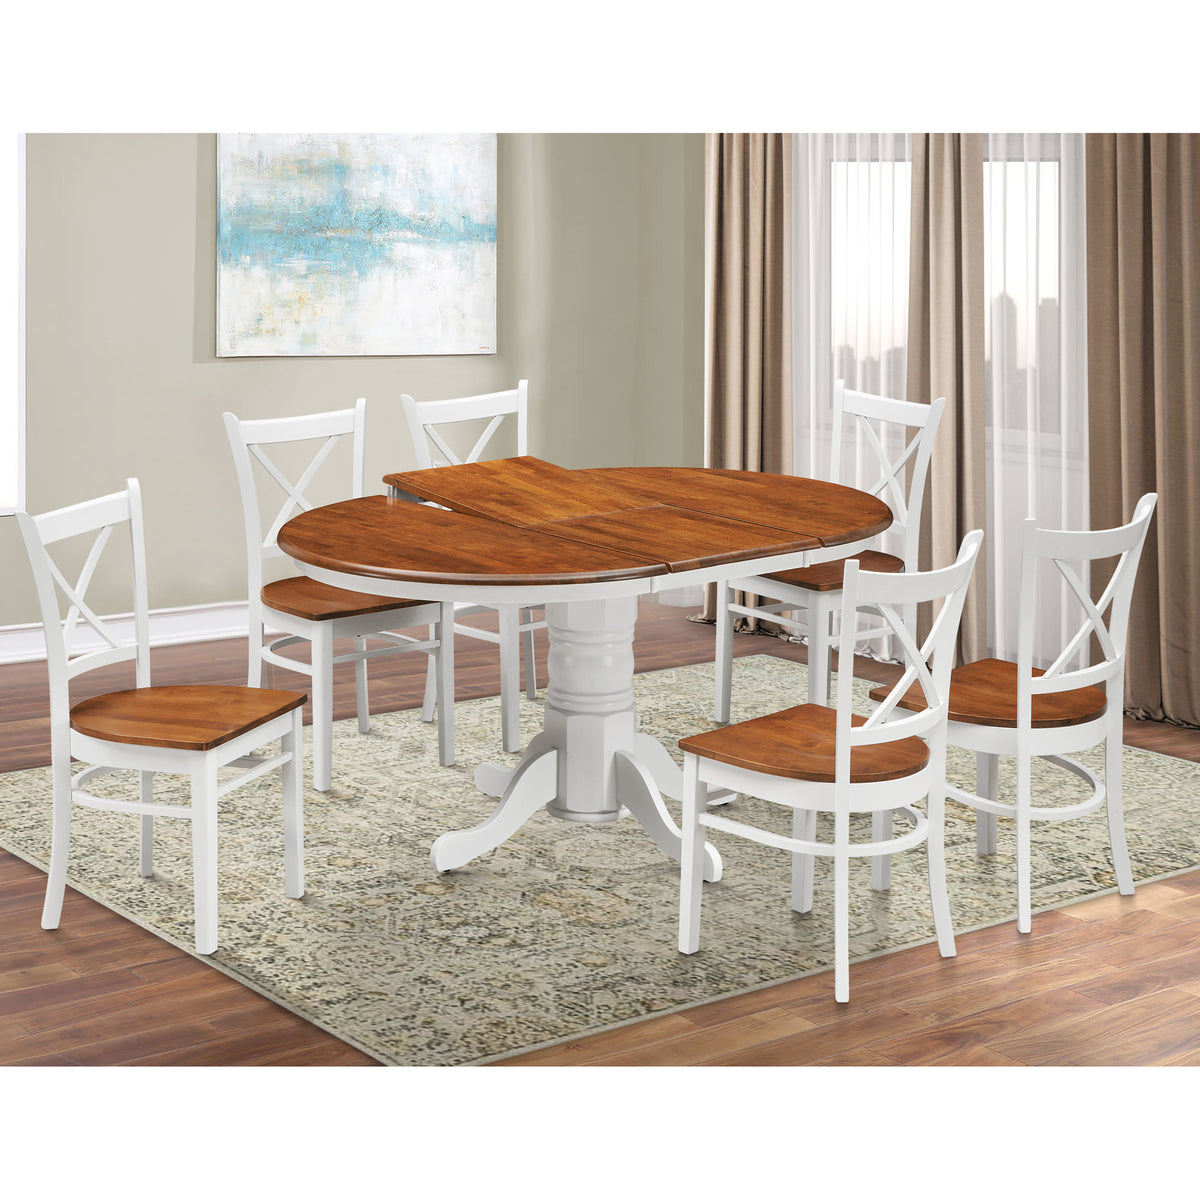 Lupin 7pc Dining Set 150cm Extendable Pedestral Table 6 Timber Chair - White Oak